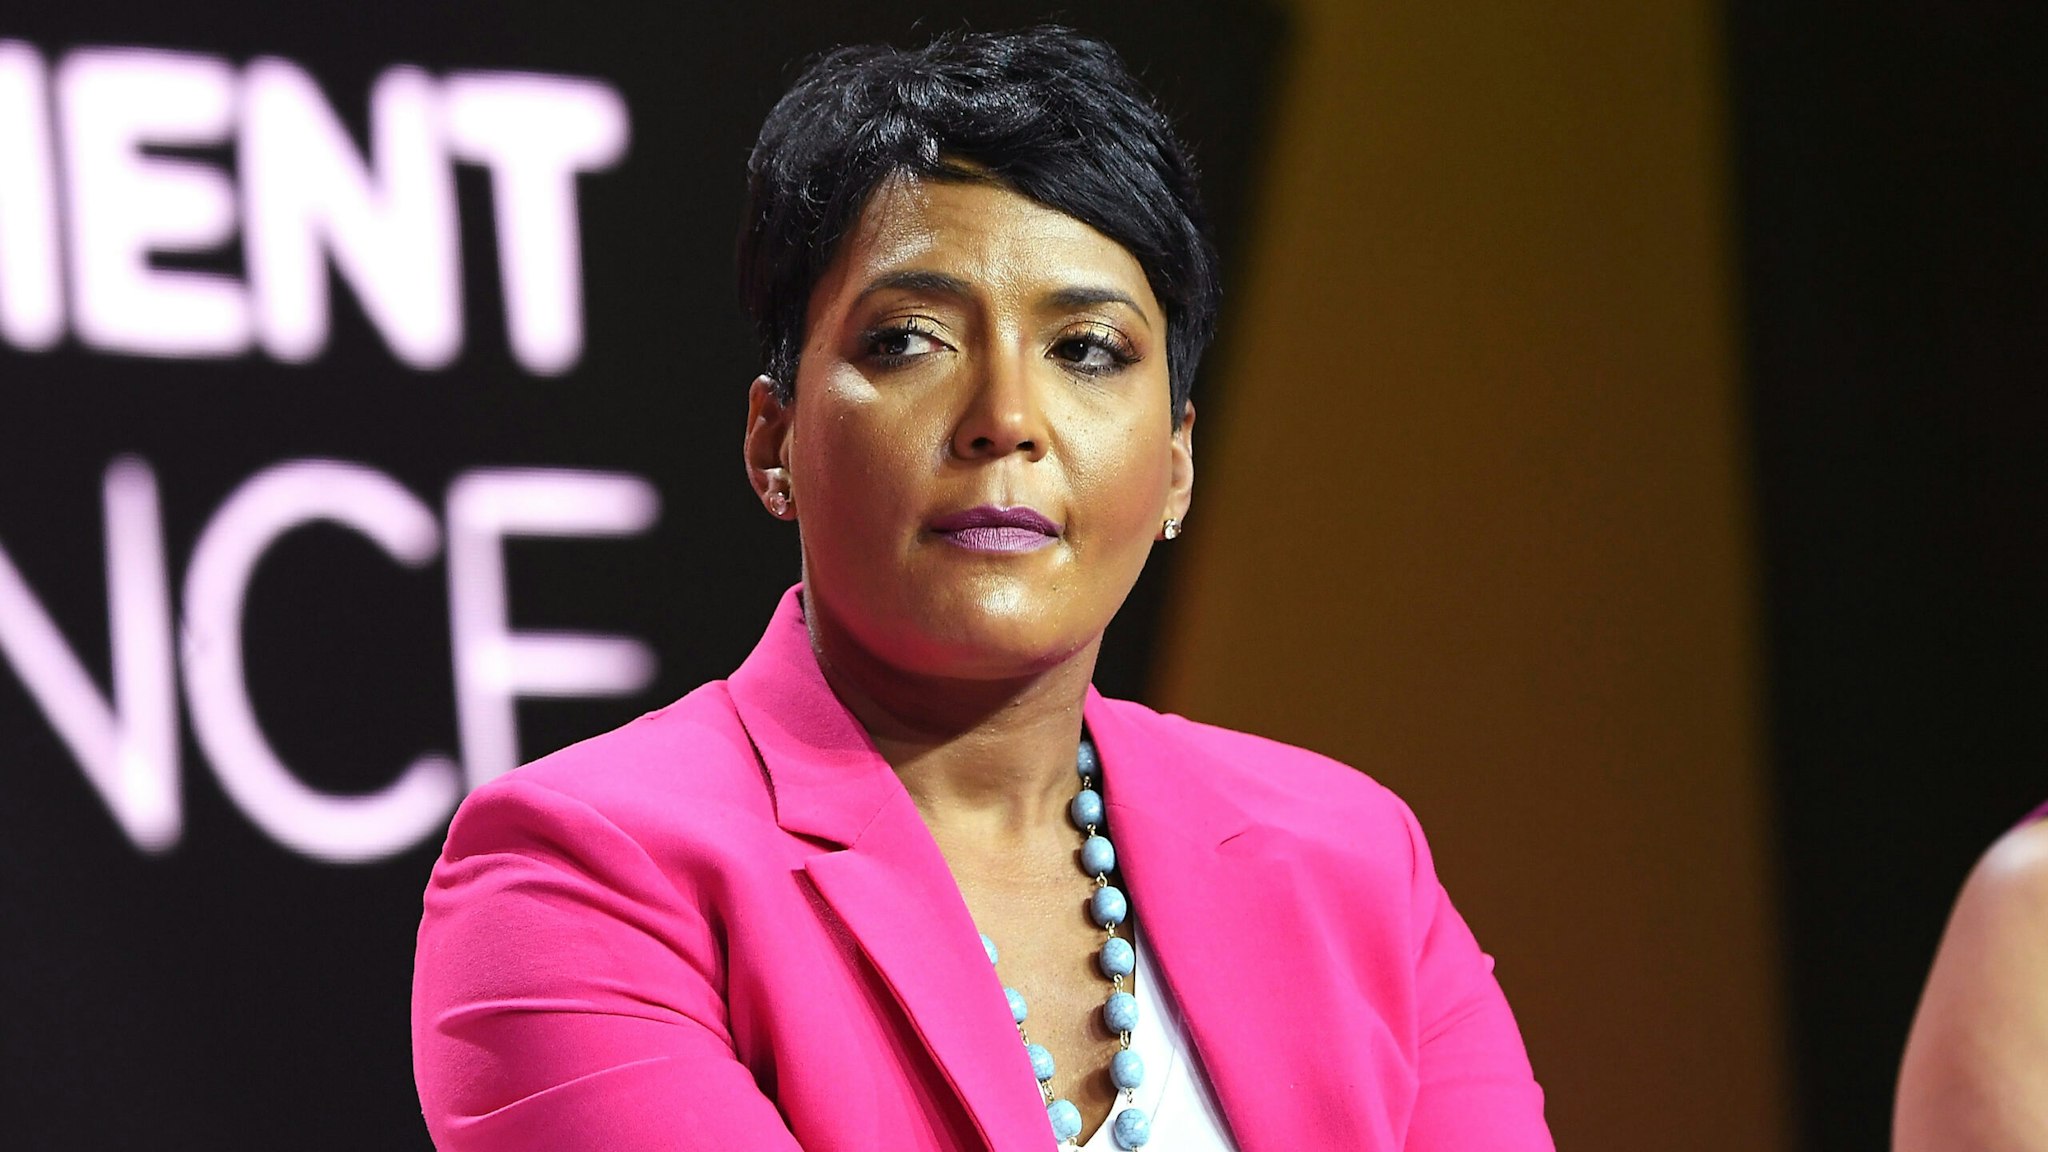 NEW ORLEANS, LA - JULY 07: Mayor of Atlanta Keisha Lance Bottoms speaks onstage during the 2018 Essence Festival presented by Coca-Cola at Ernest N. Morial Convention Center on July 7, 2018 in New Orleans, Louisiana.